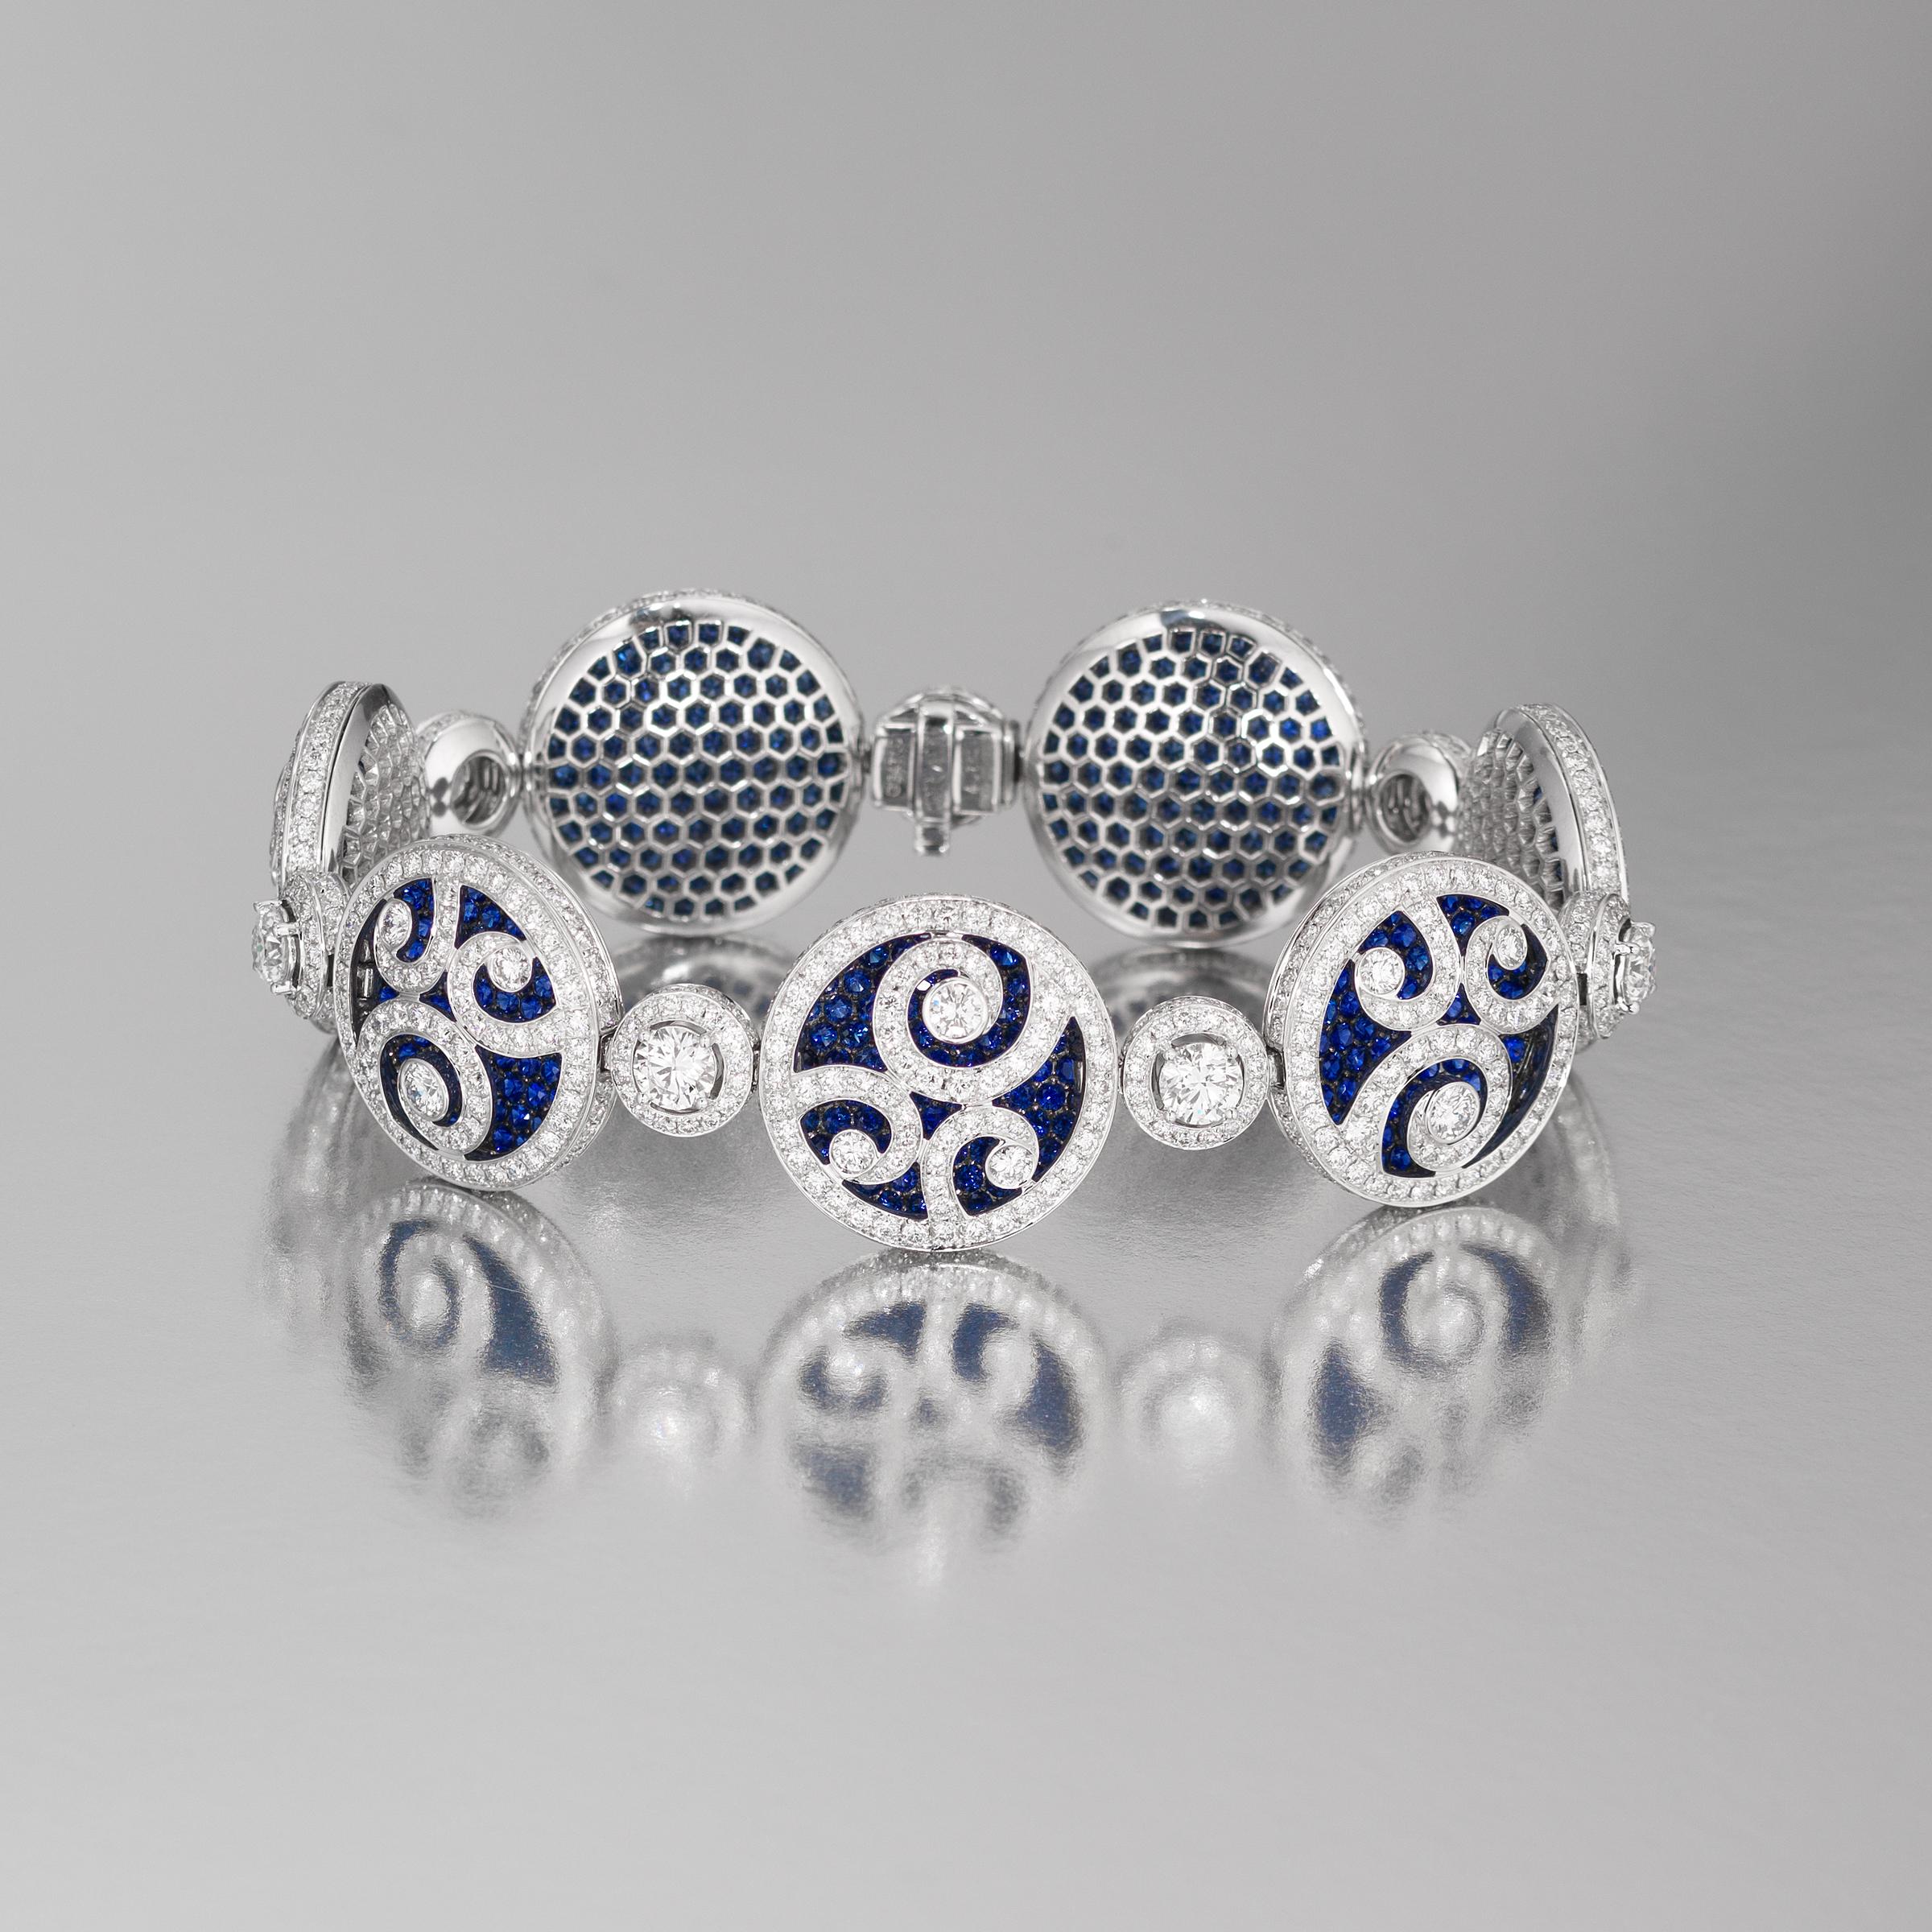 Exceptional Graff high jewelry bracelet of dazzling medallion design and showcasing 11.65 carats of finest white diamonds (approximately E to G color, VVS to VS clarity) and 10.93 carats of richly-hued blue sapphires, all set in 18 karat white gold.